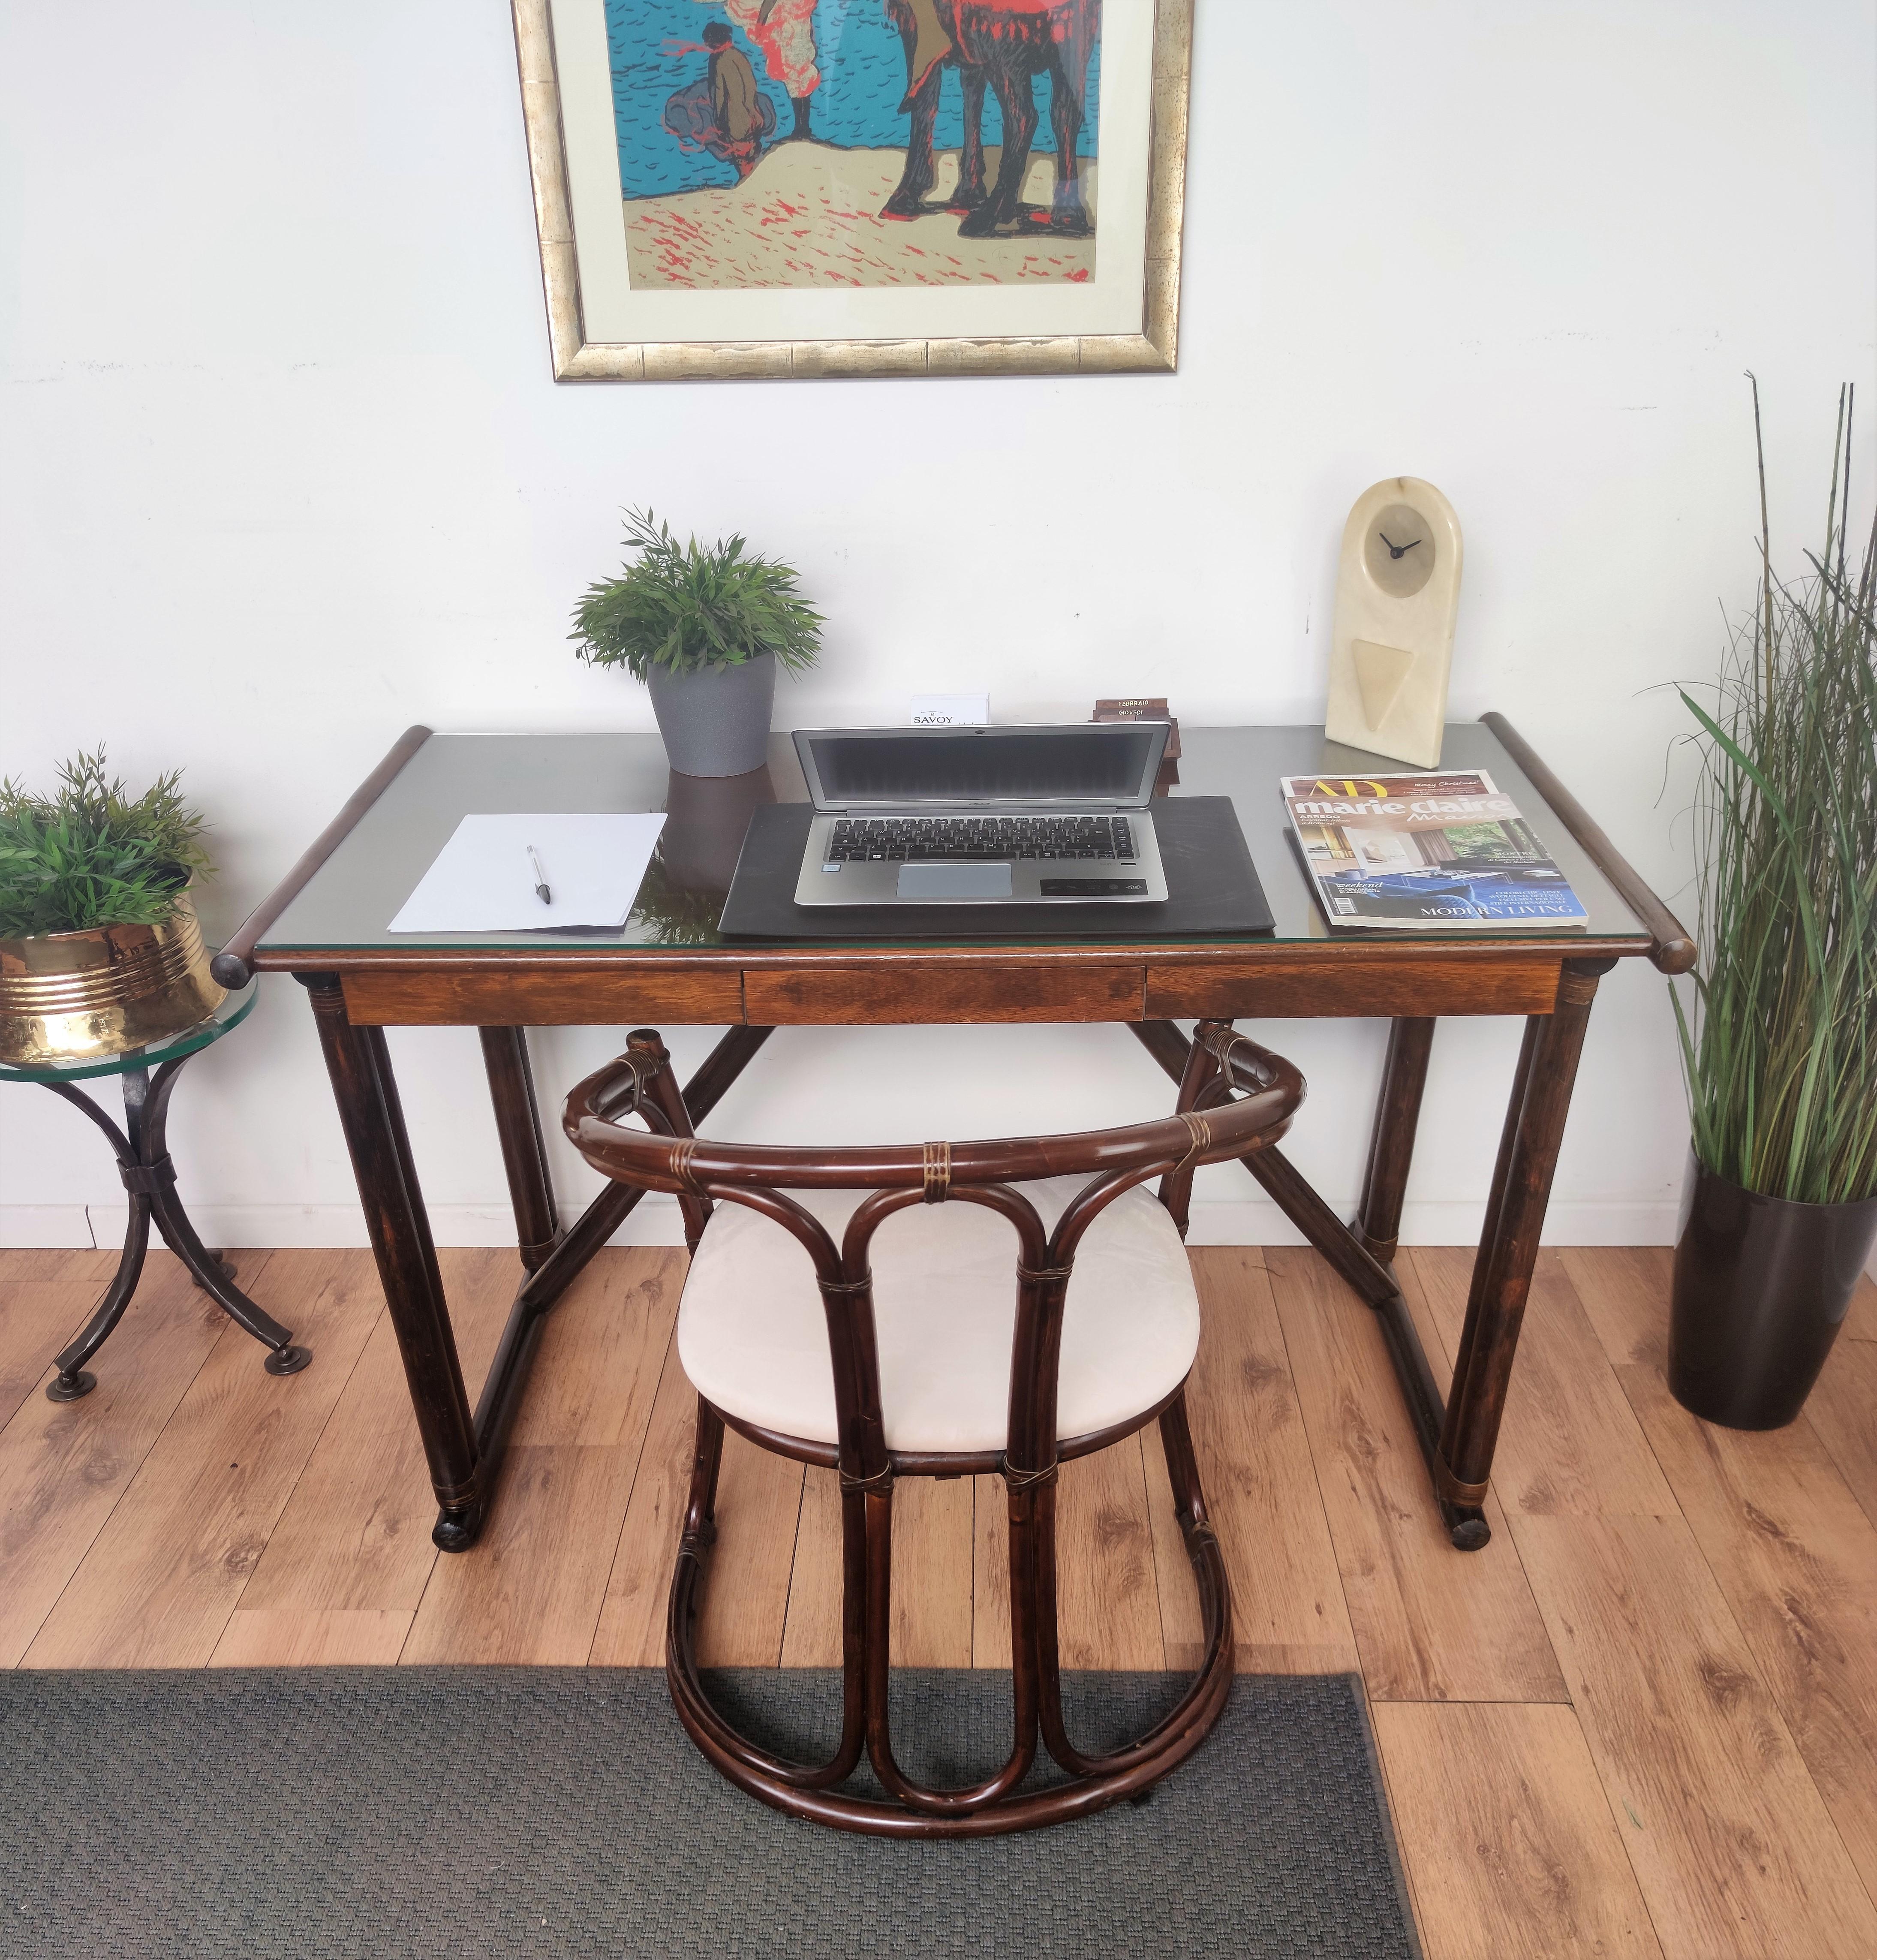 Beautiful mid-century Regency Italian writing table or desk with its paired newly upholstered chair both in greatly shaped and worked wood inspired to the typical bamboo organic bohemian style. 

The desk features a glass top, three drawers and